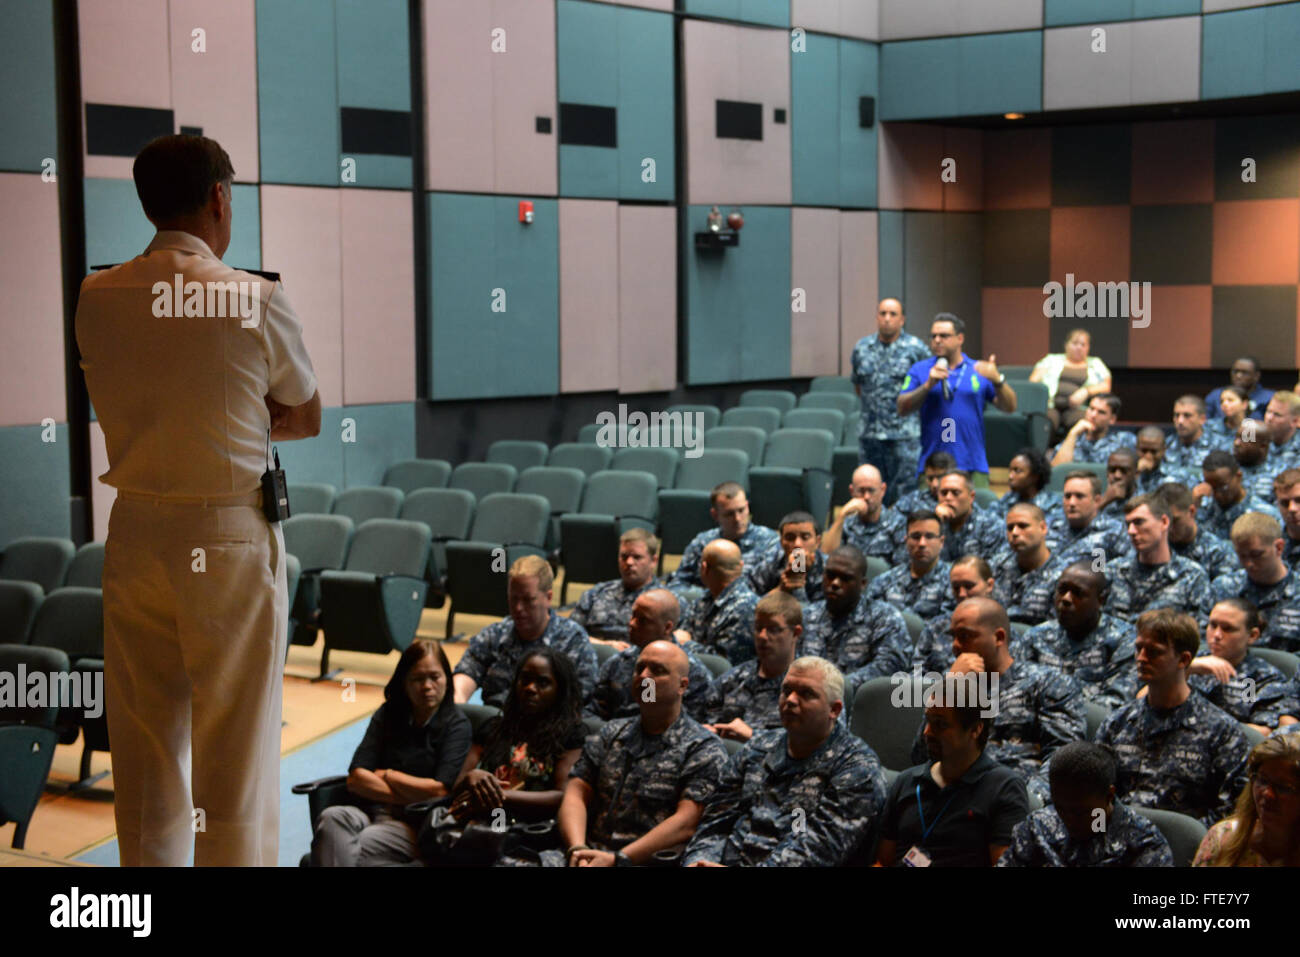 140729-UE250-028 NAPLES, Italy (July 29, 2014) Commander, U.S. Naval Forces Europe-Africa, Adm. Mark Ferguson, speaks to Sailors at an all-hands call on Naval Support Activity Naples, Capodichino. During the all-hands call, Ferguson talked to Sailors about his guiding principles, vision and guidance, and expectations going forward. (U.S. Navy photo by Mass Communication Specialist 2nd Class Corey Hensley/Released) Stock Photo